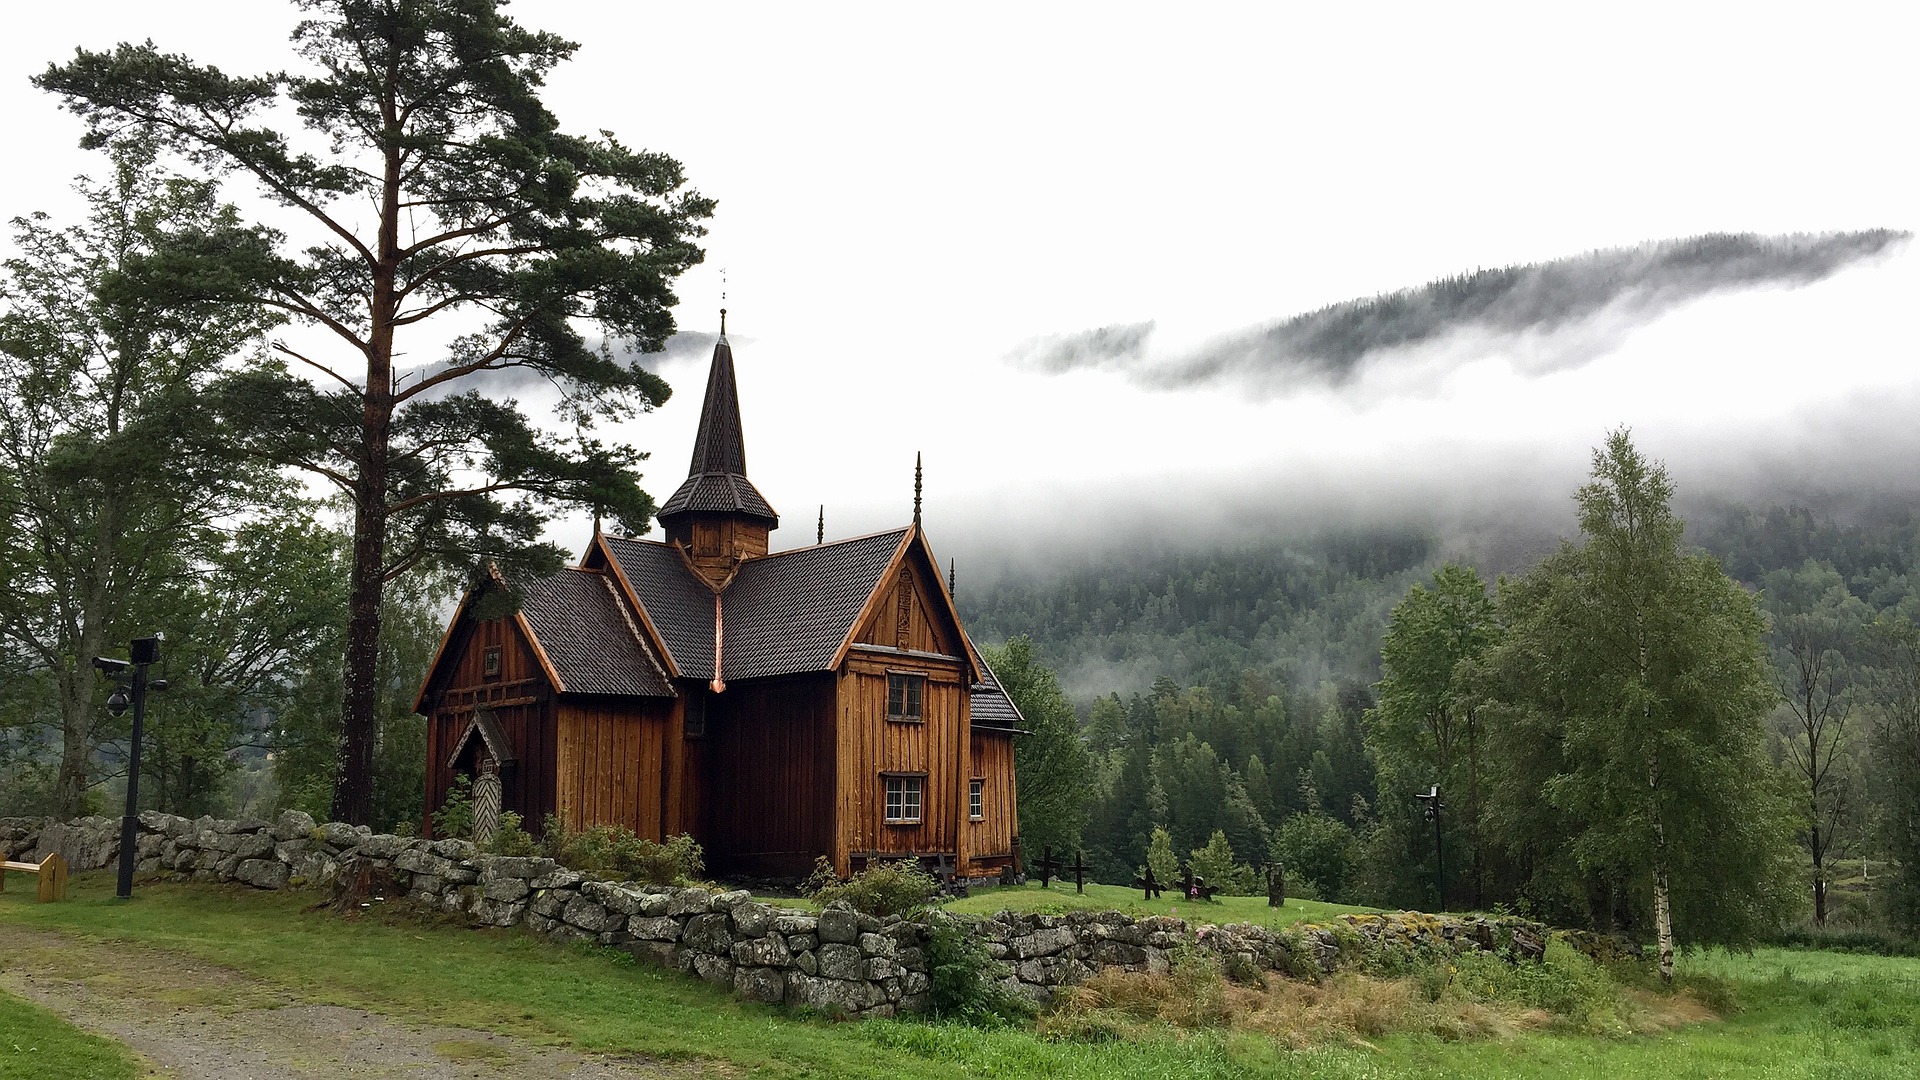 Stave wooden church in forest area of Norway